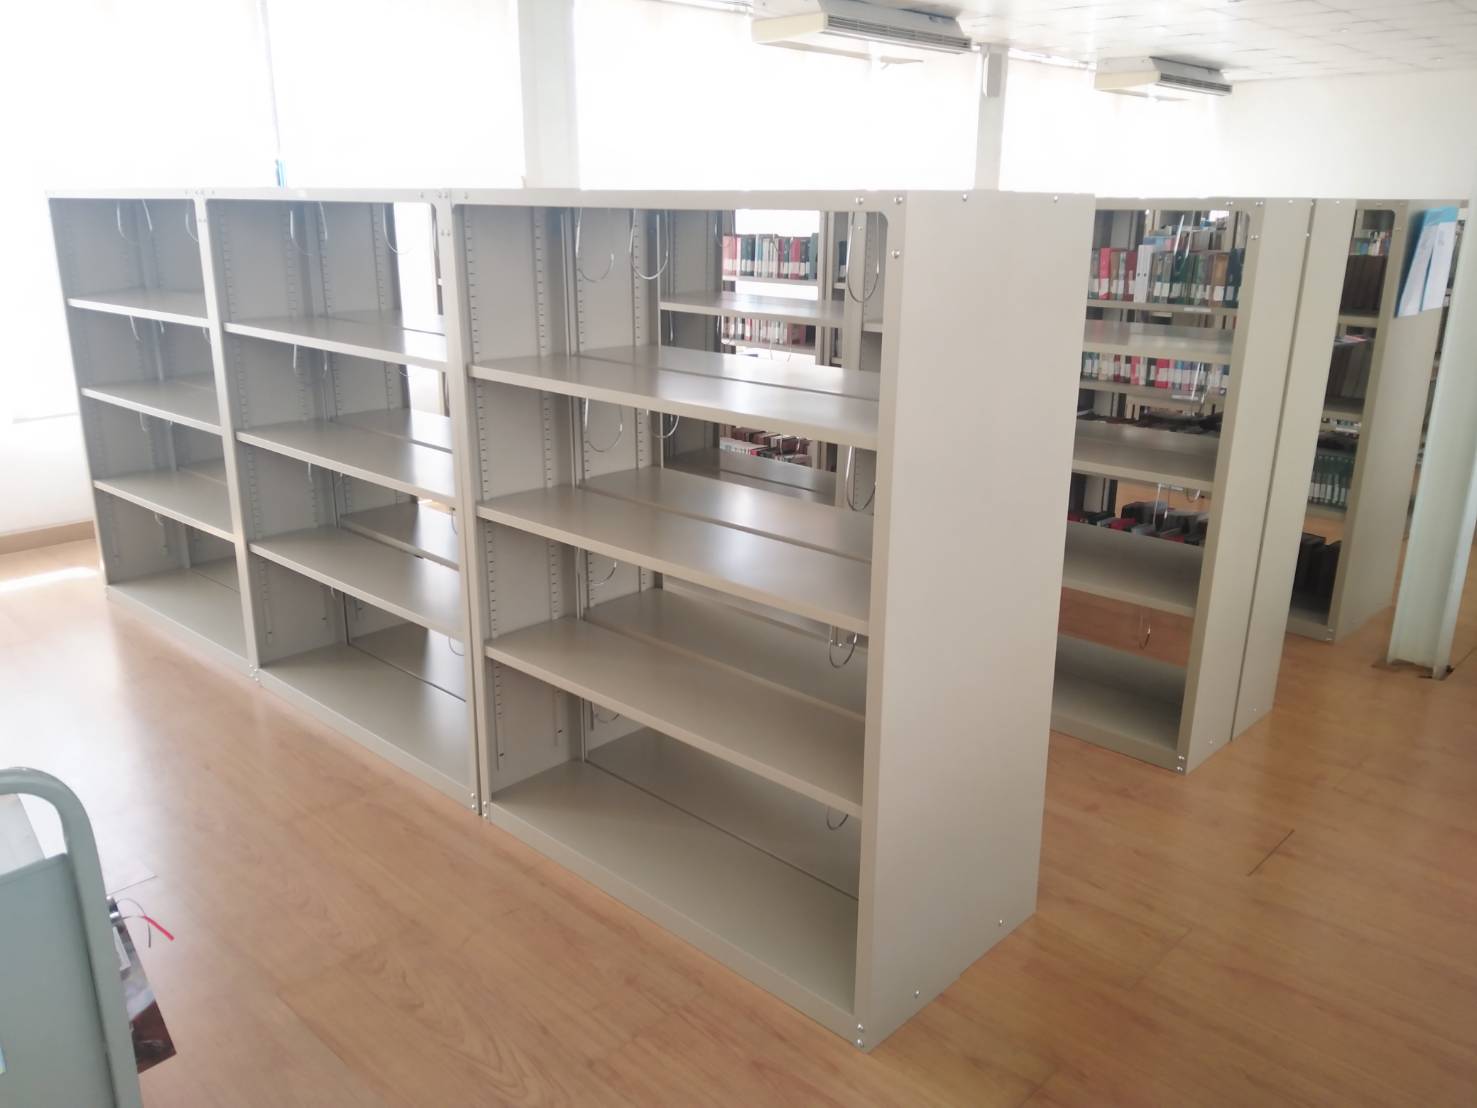 89031::S-504-S-204::A Lucky metal book shelves with adjustable shelves. Dimension (WxDxH) cm : 121.9x30.5x152.7/121.9x30.5x91.8  LUCKY Steel Book Shelves